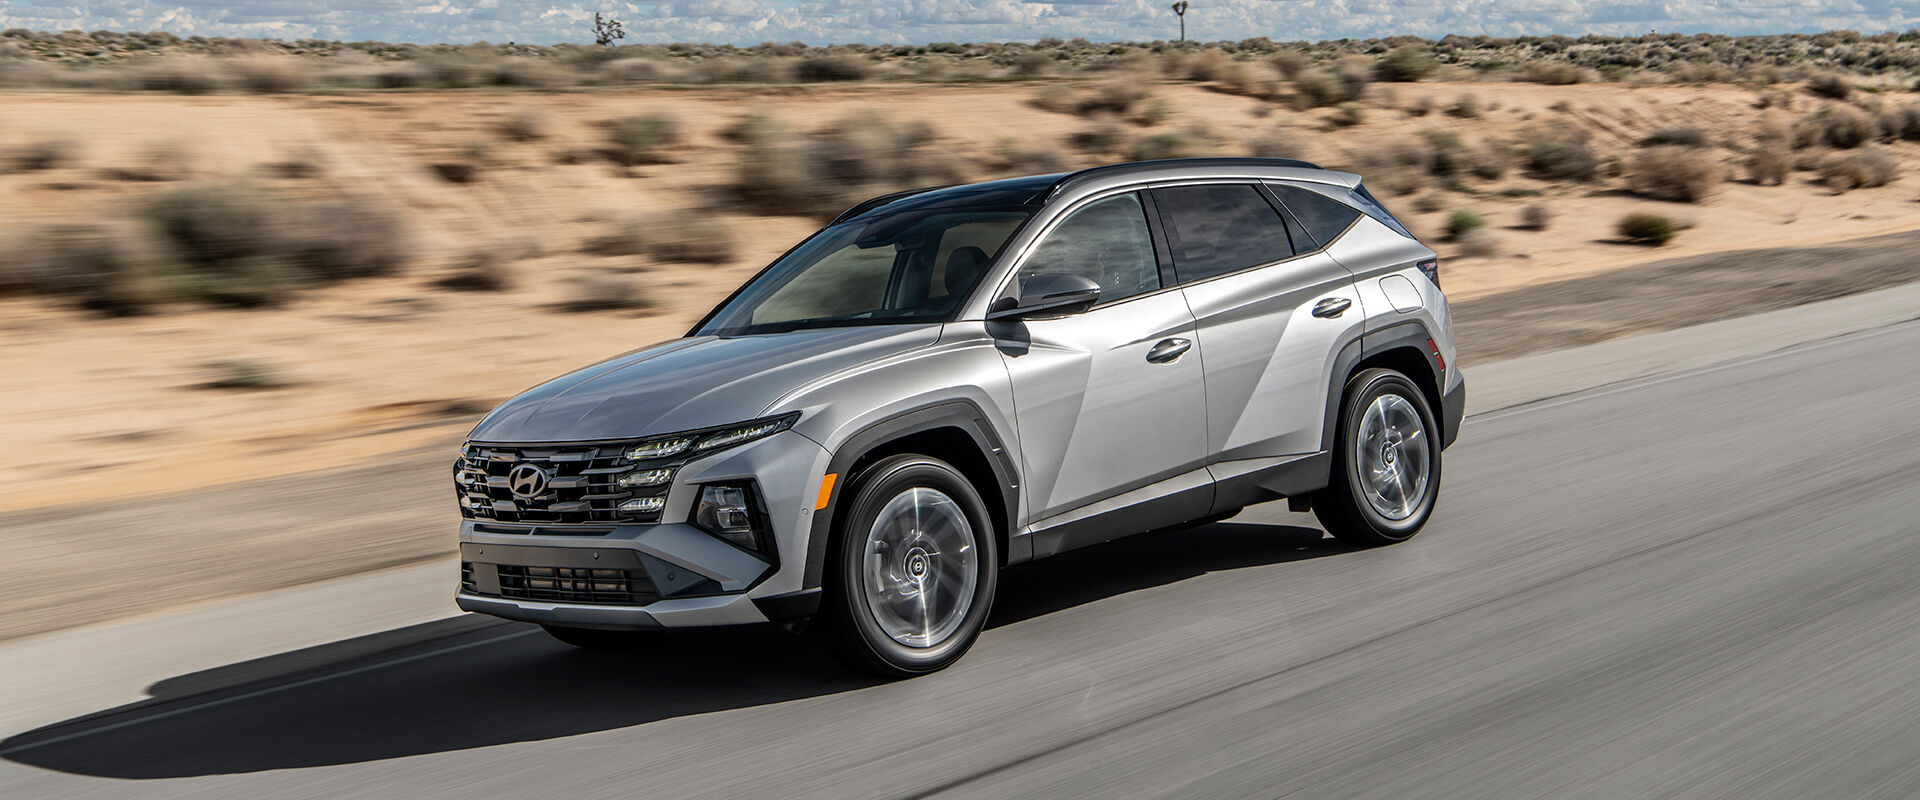 Hyundai today unveiled its thoroughly refreshed 2025 TUCSON SUV in a North American reveal at the New York International Auto Show